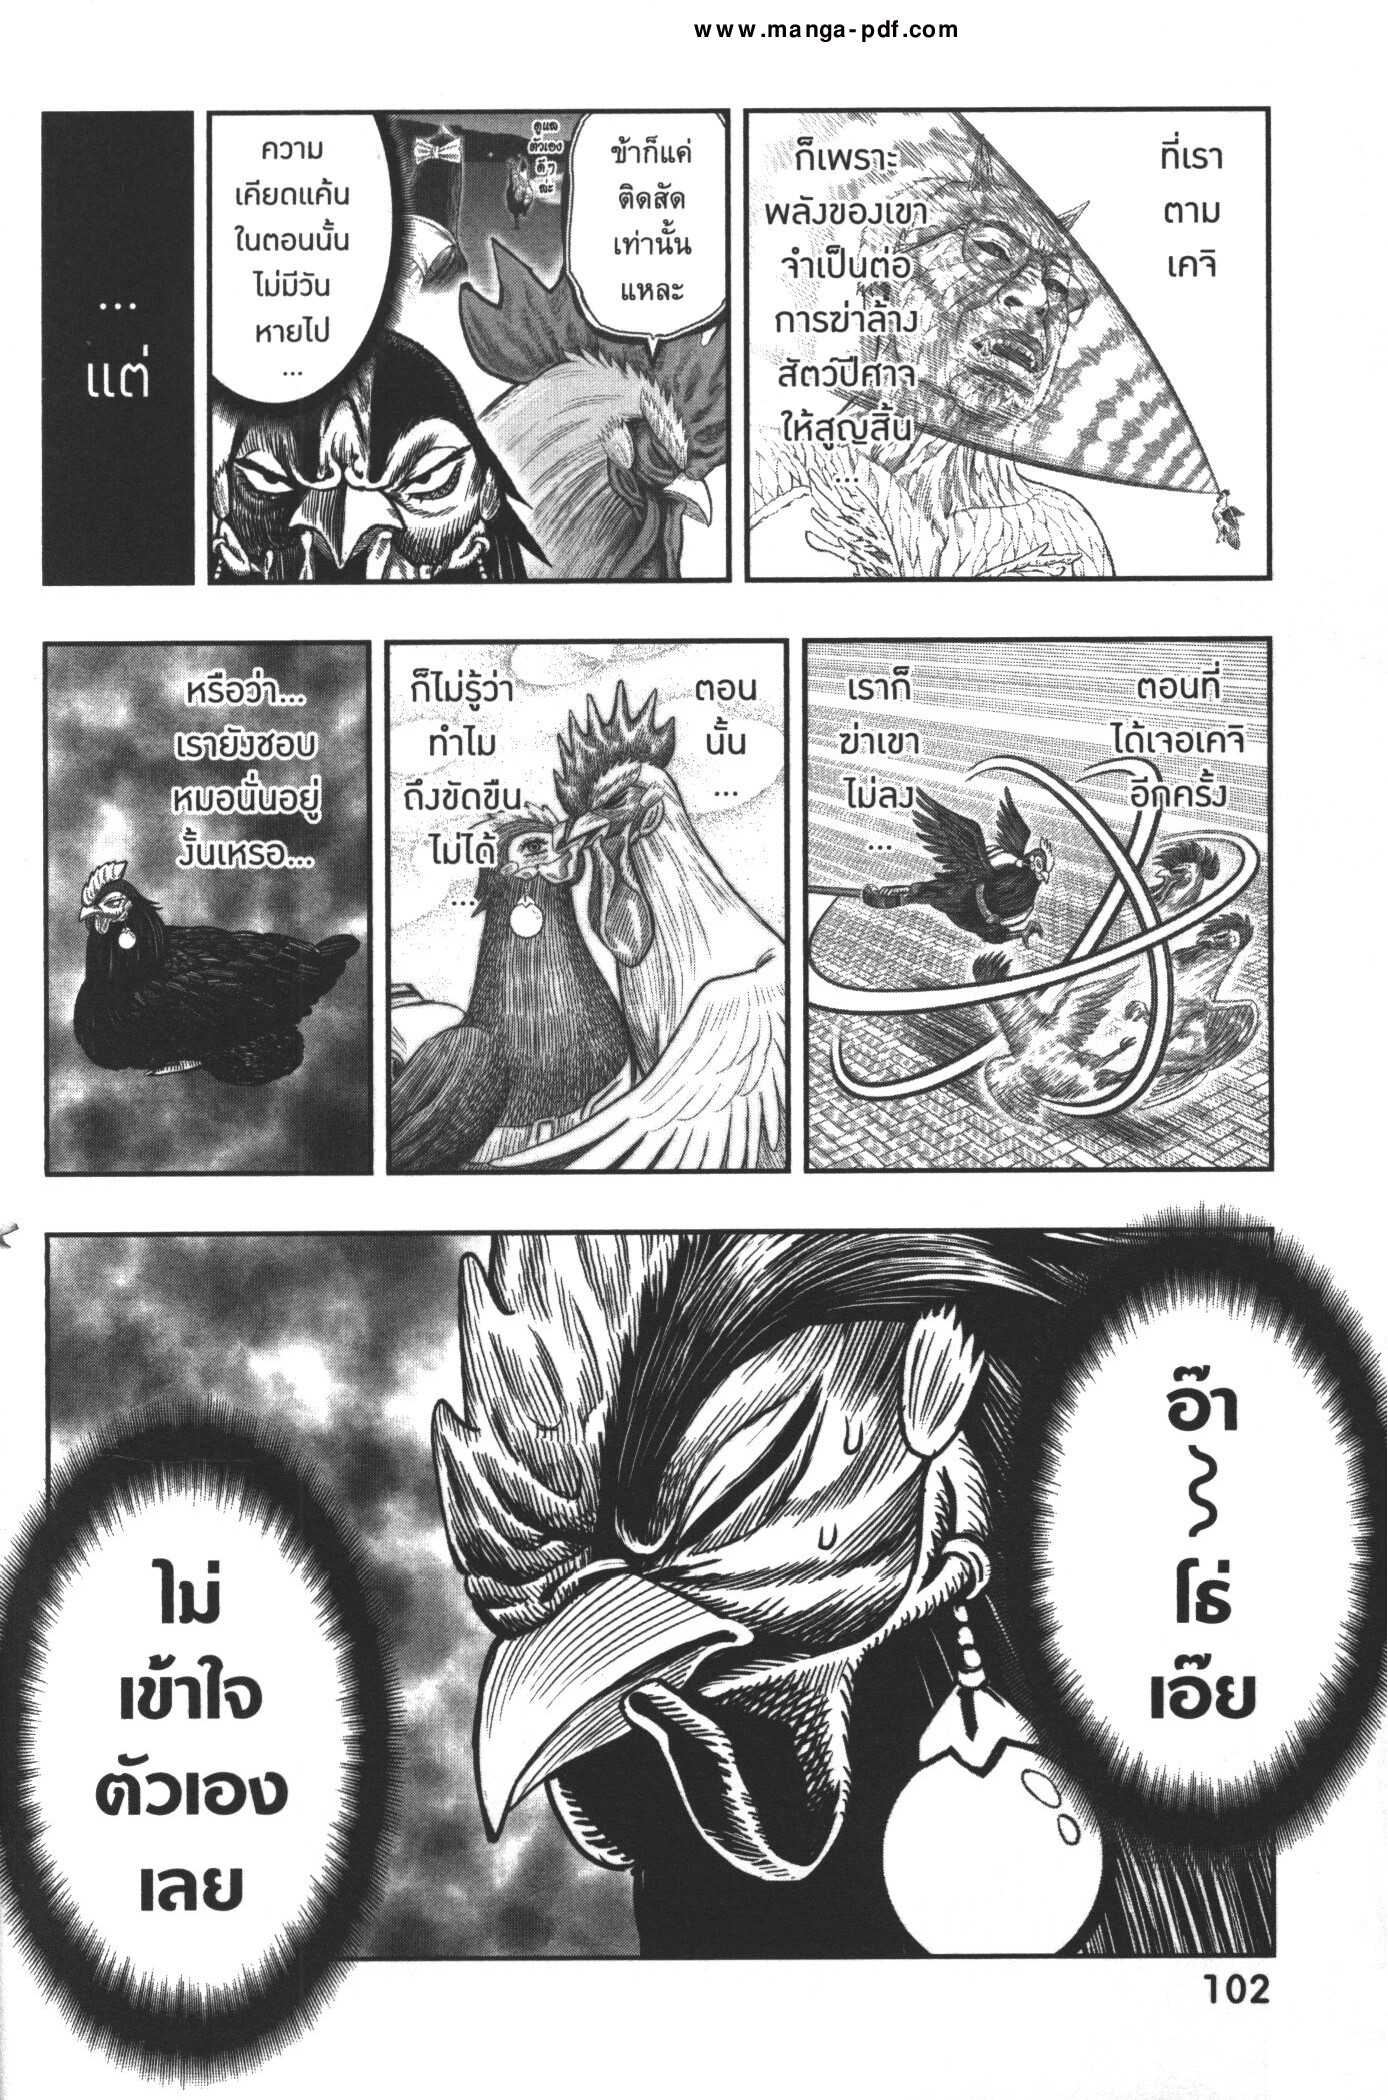 Rooster Fighter 13 (12)